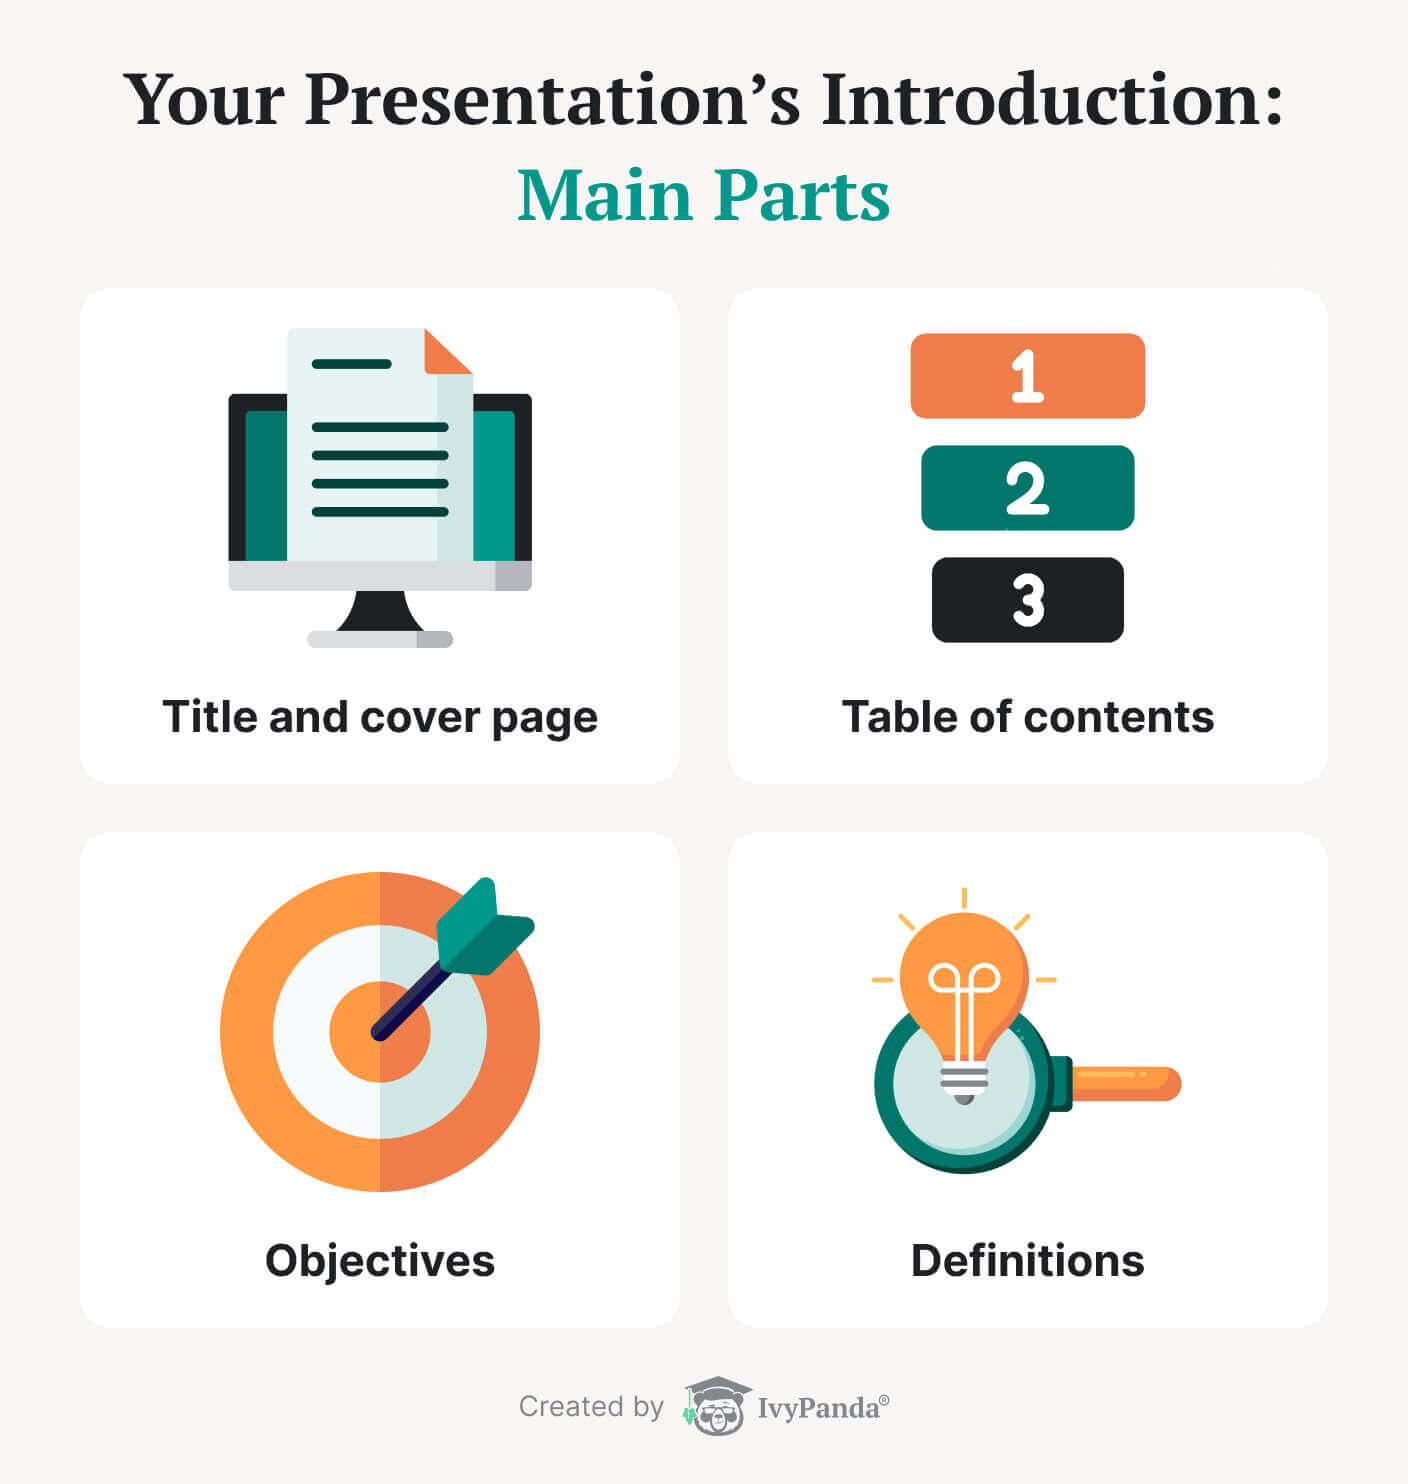 The picture shows the 4 main parts of a presentation's introduction.